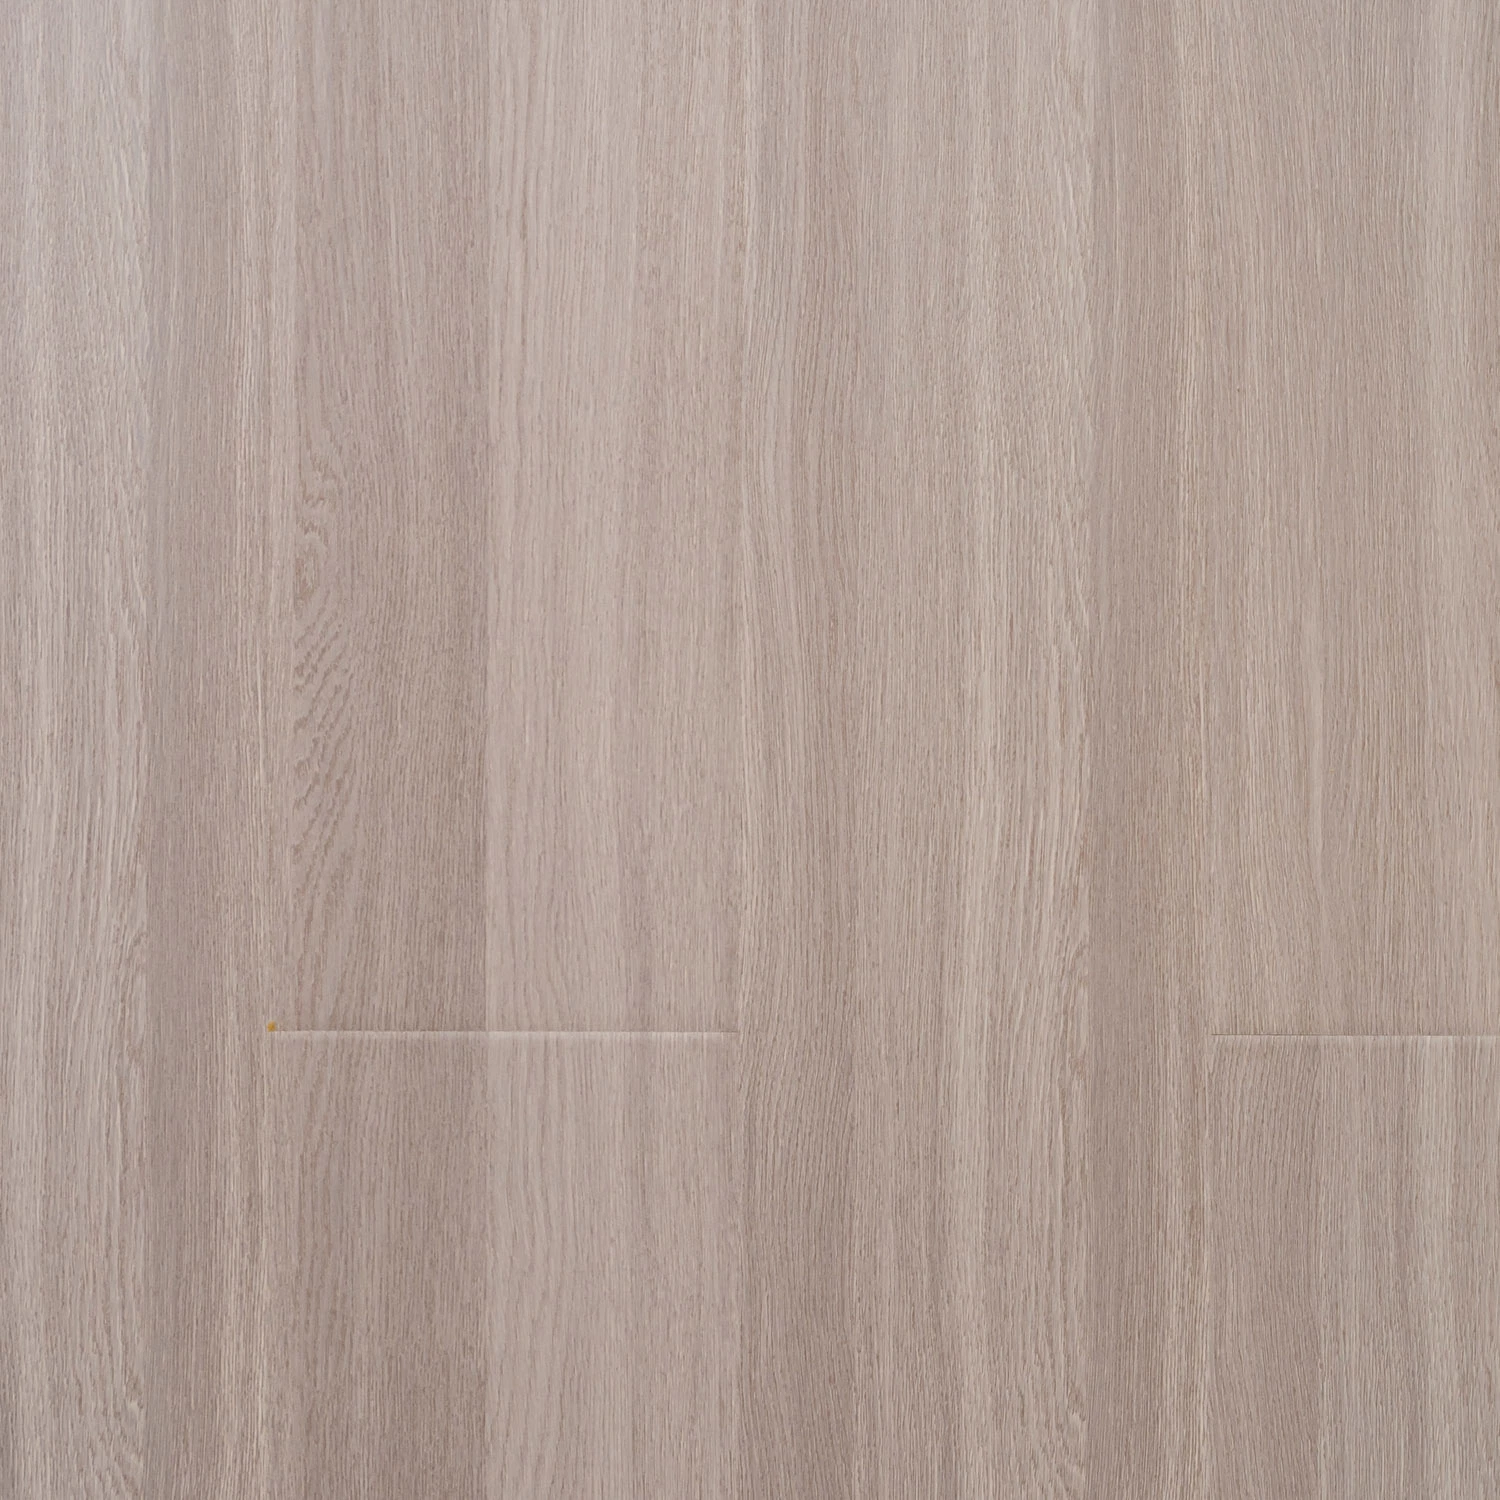 India Hardwood Commercial Click Laminated Parquet Wooden Flooring for Sale